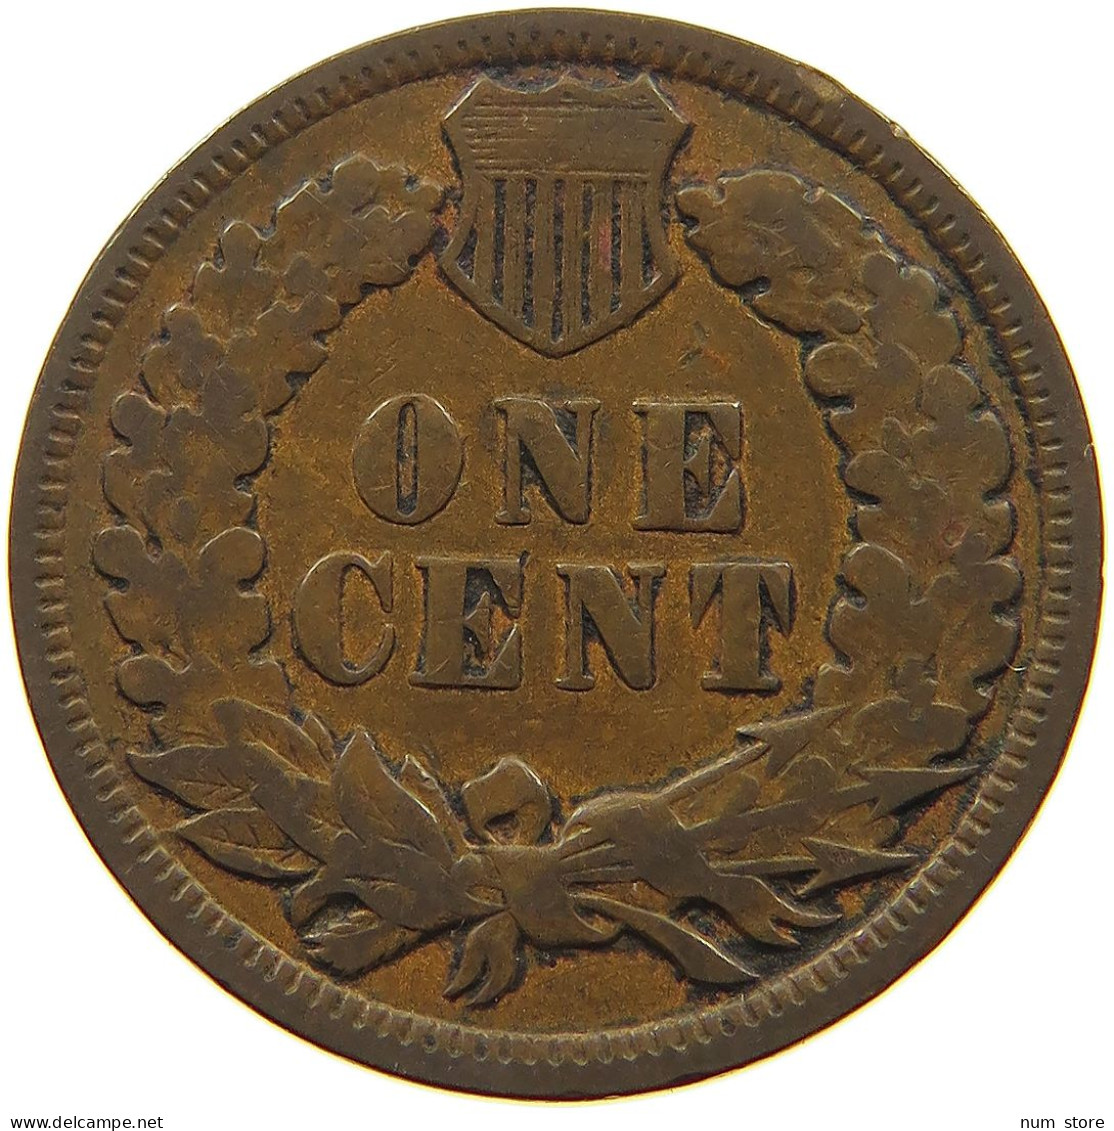 UNITED STATES OF AMERICA CENT 1895 INDIAN HEAD #s063 0101 - 1859-1909: Indian Head